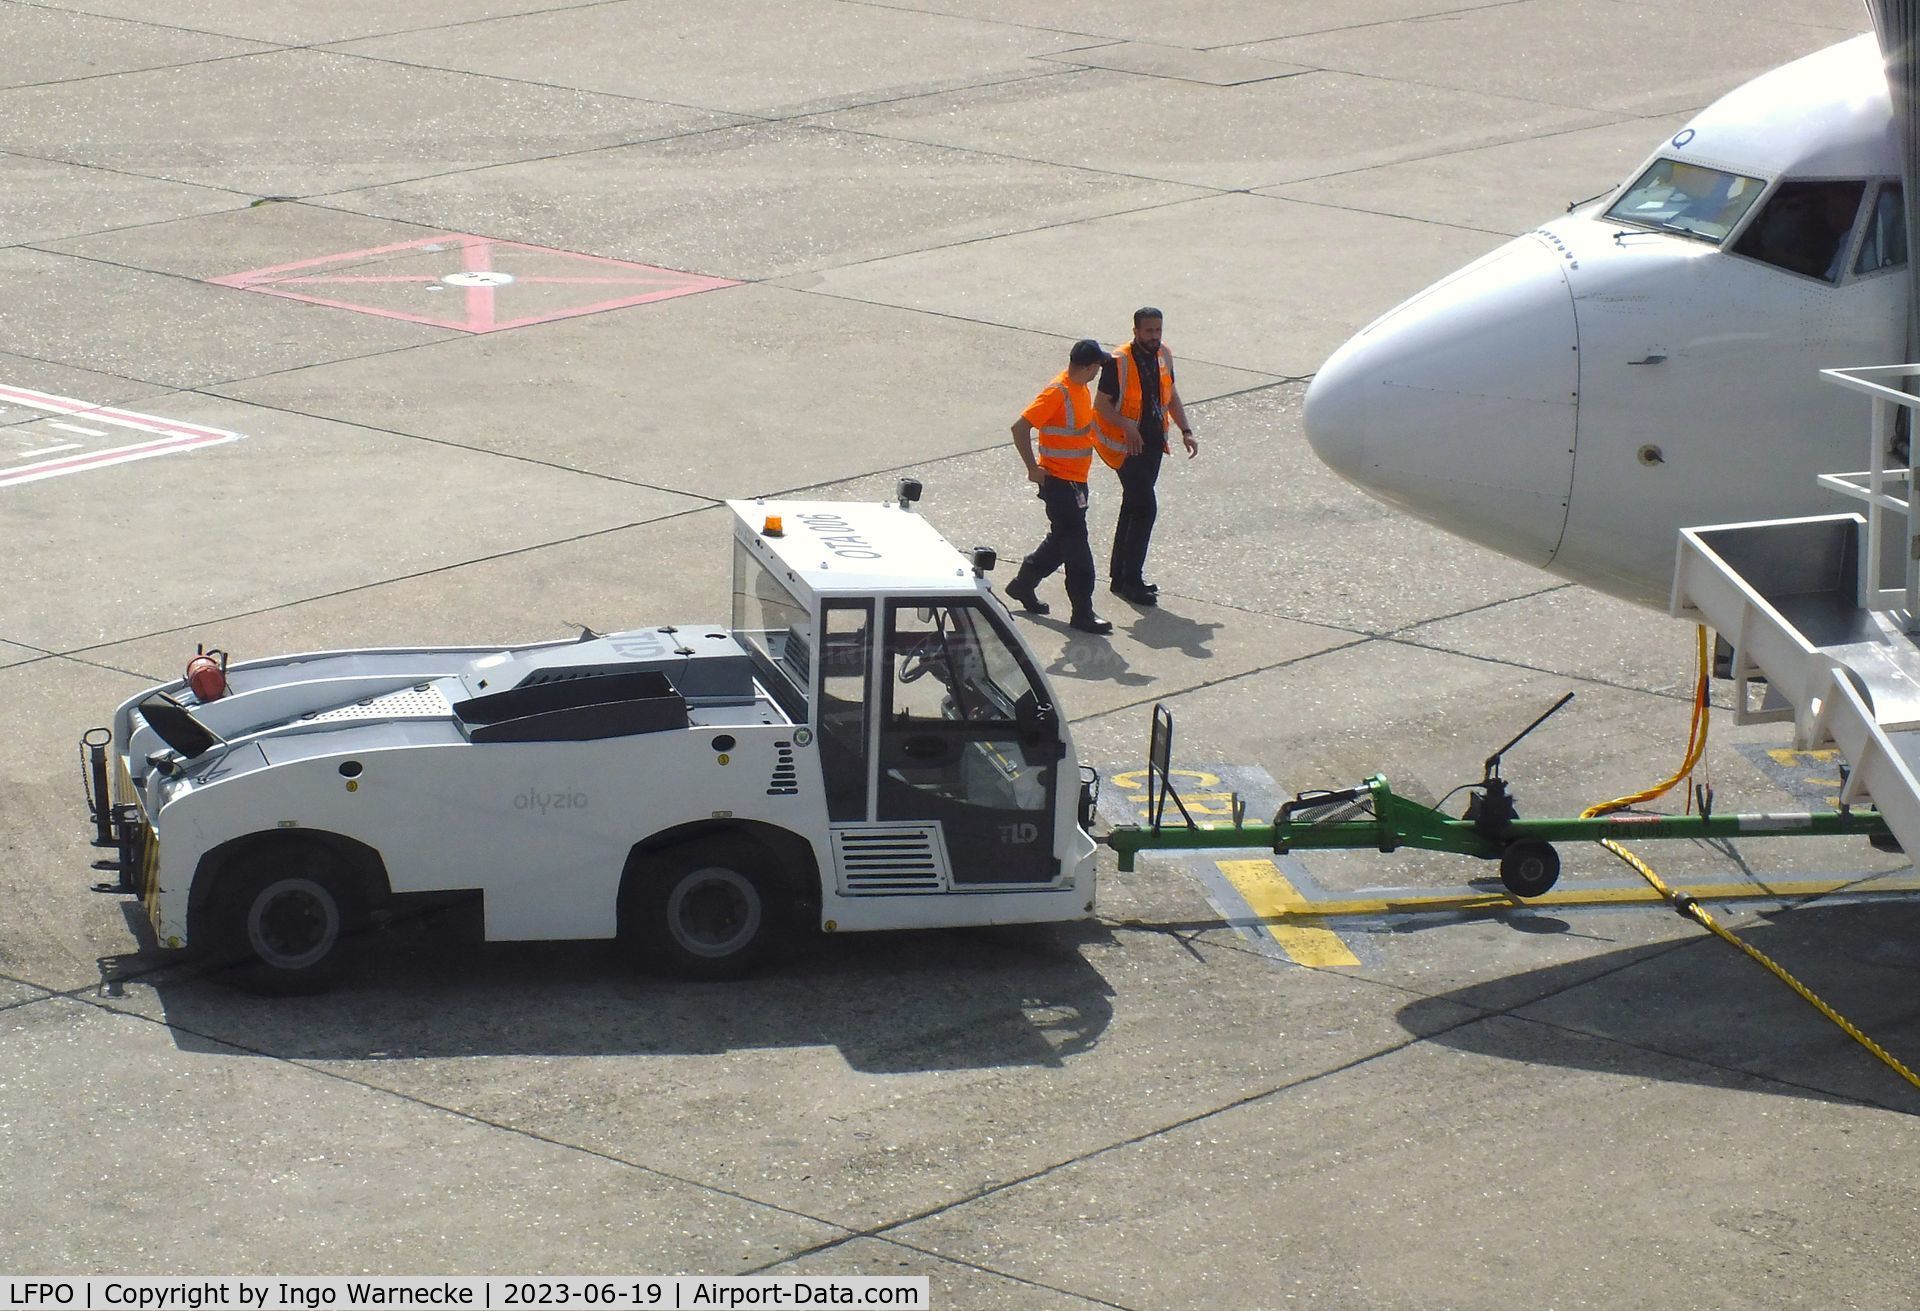 Paris Orly Airport, Orly (near Paris) France (LFPO) - pushback tug in action at Paris/Orly airport